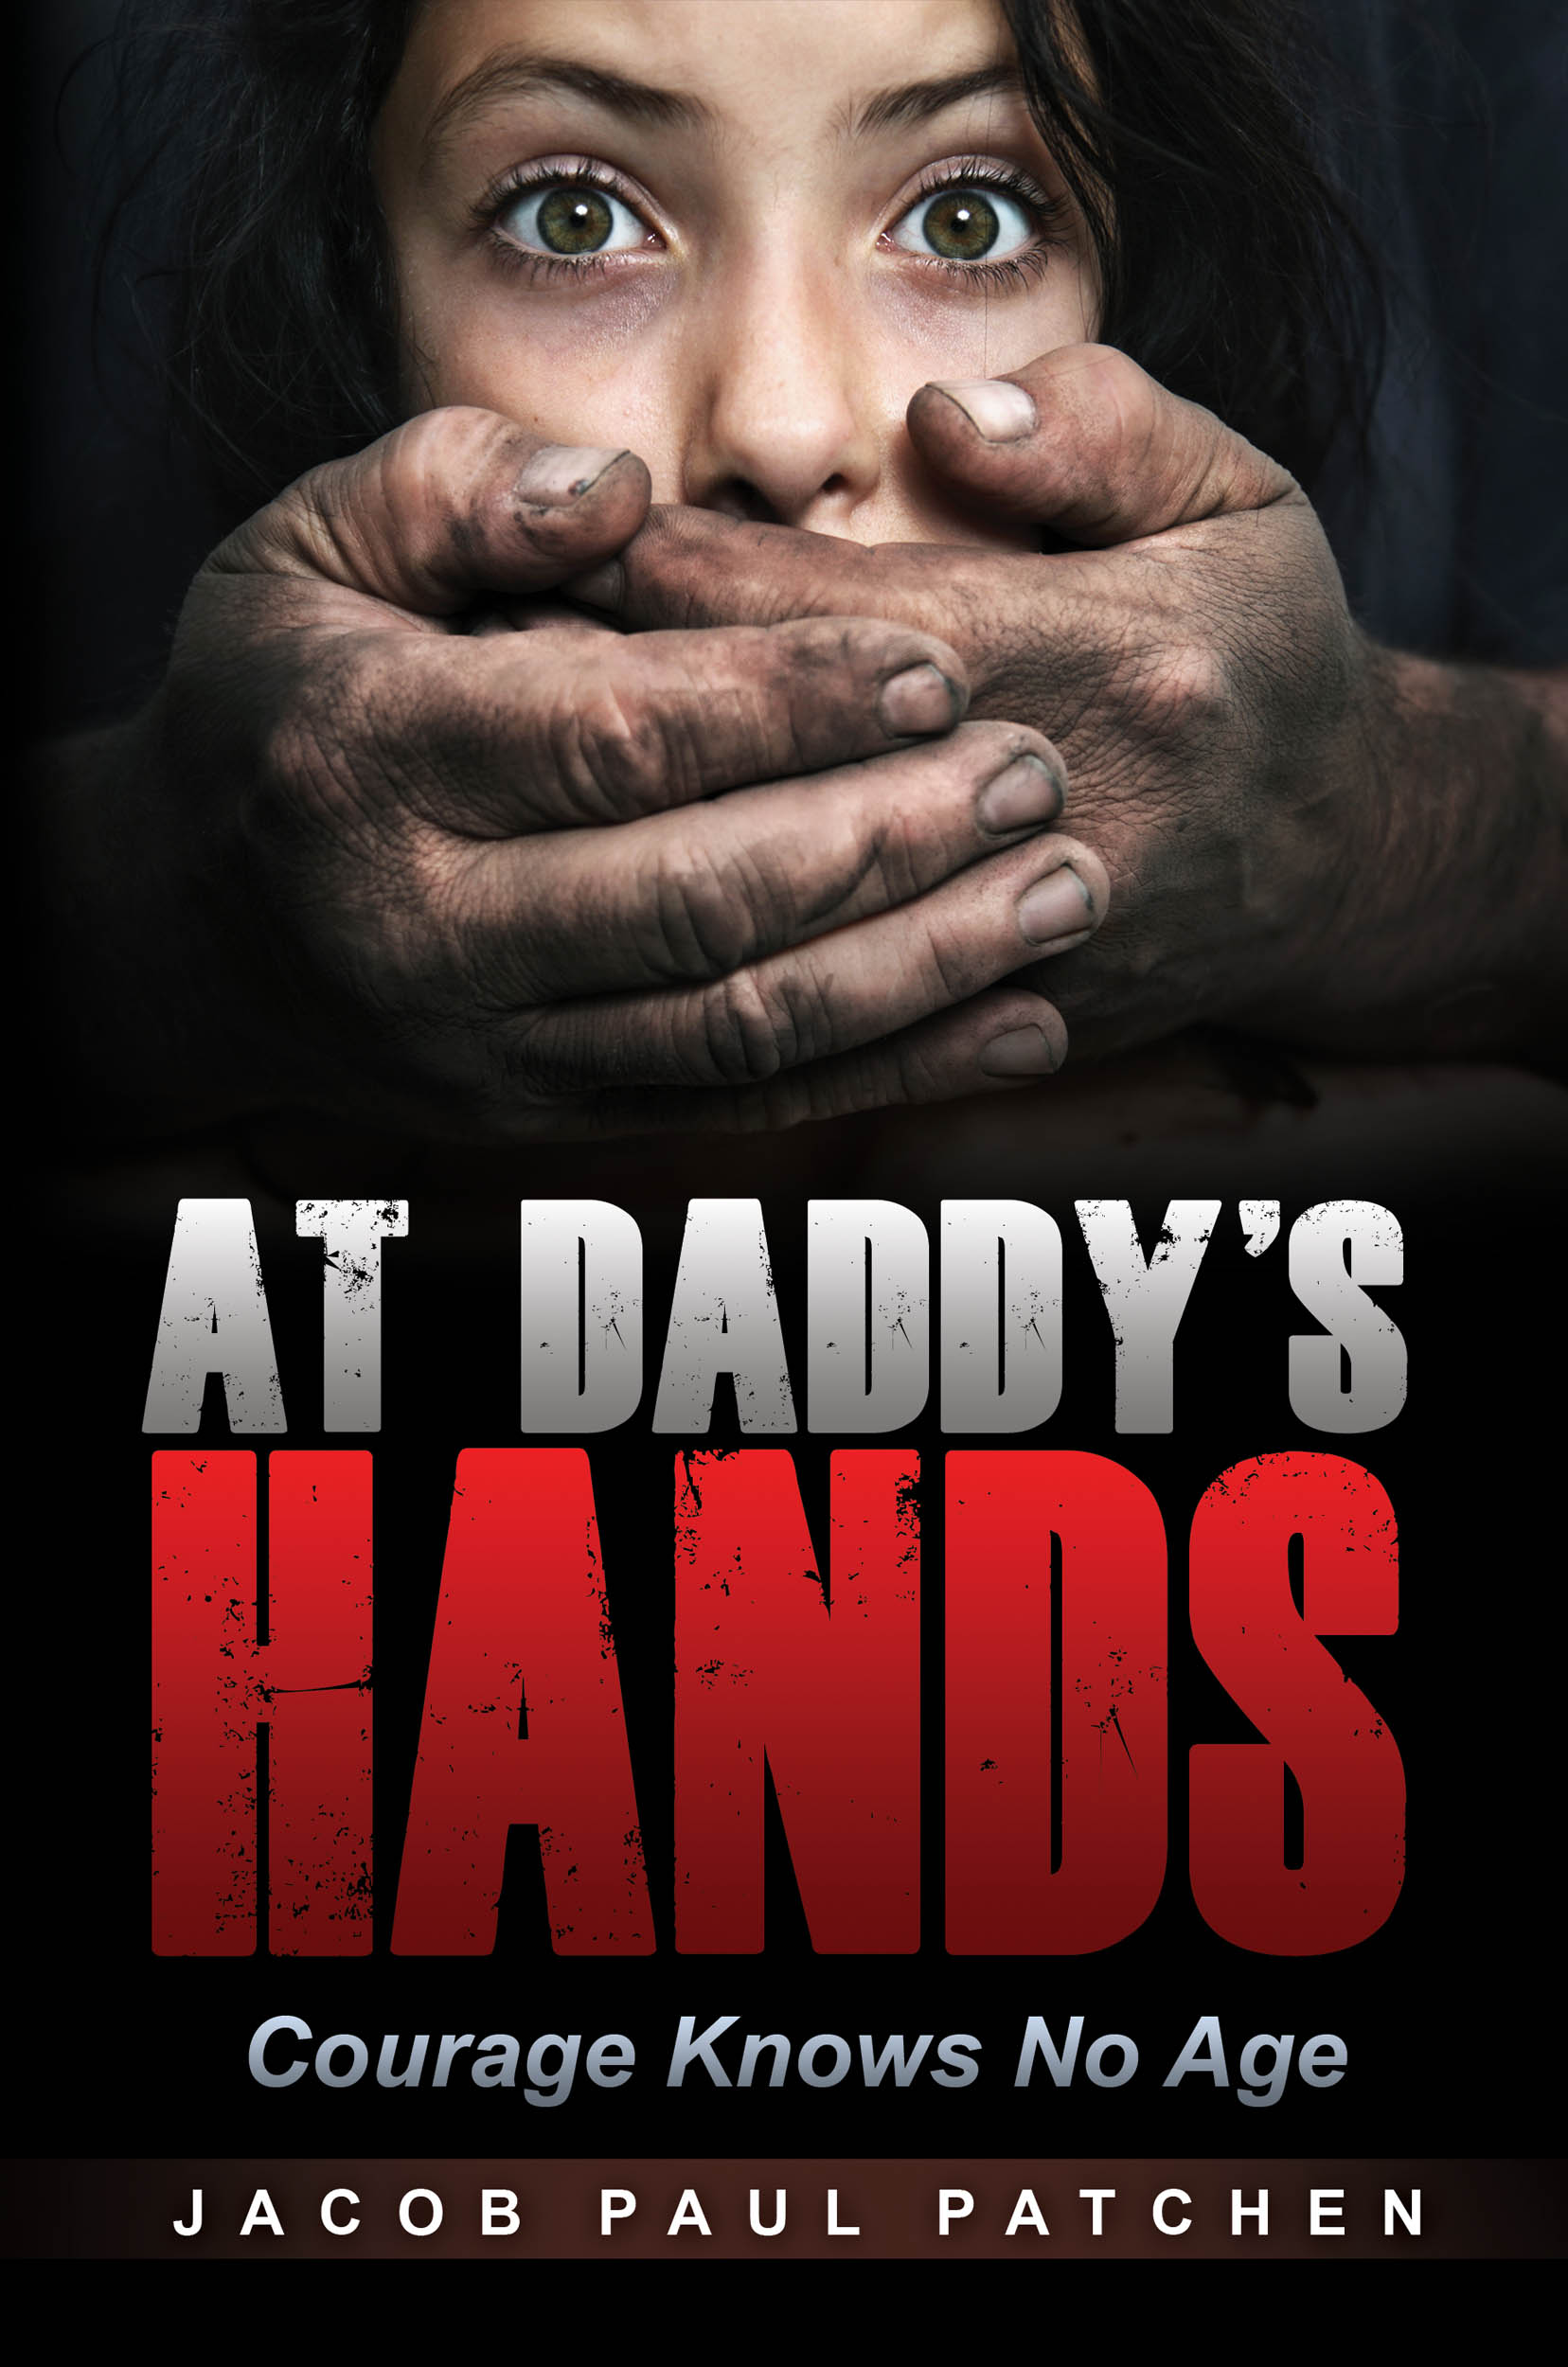 FREE: At Daddy’s Hands: Courage Knows No Age by Jacob Paul Patchen